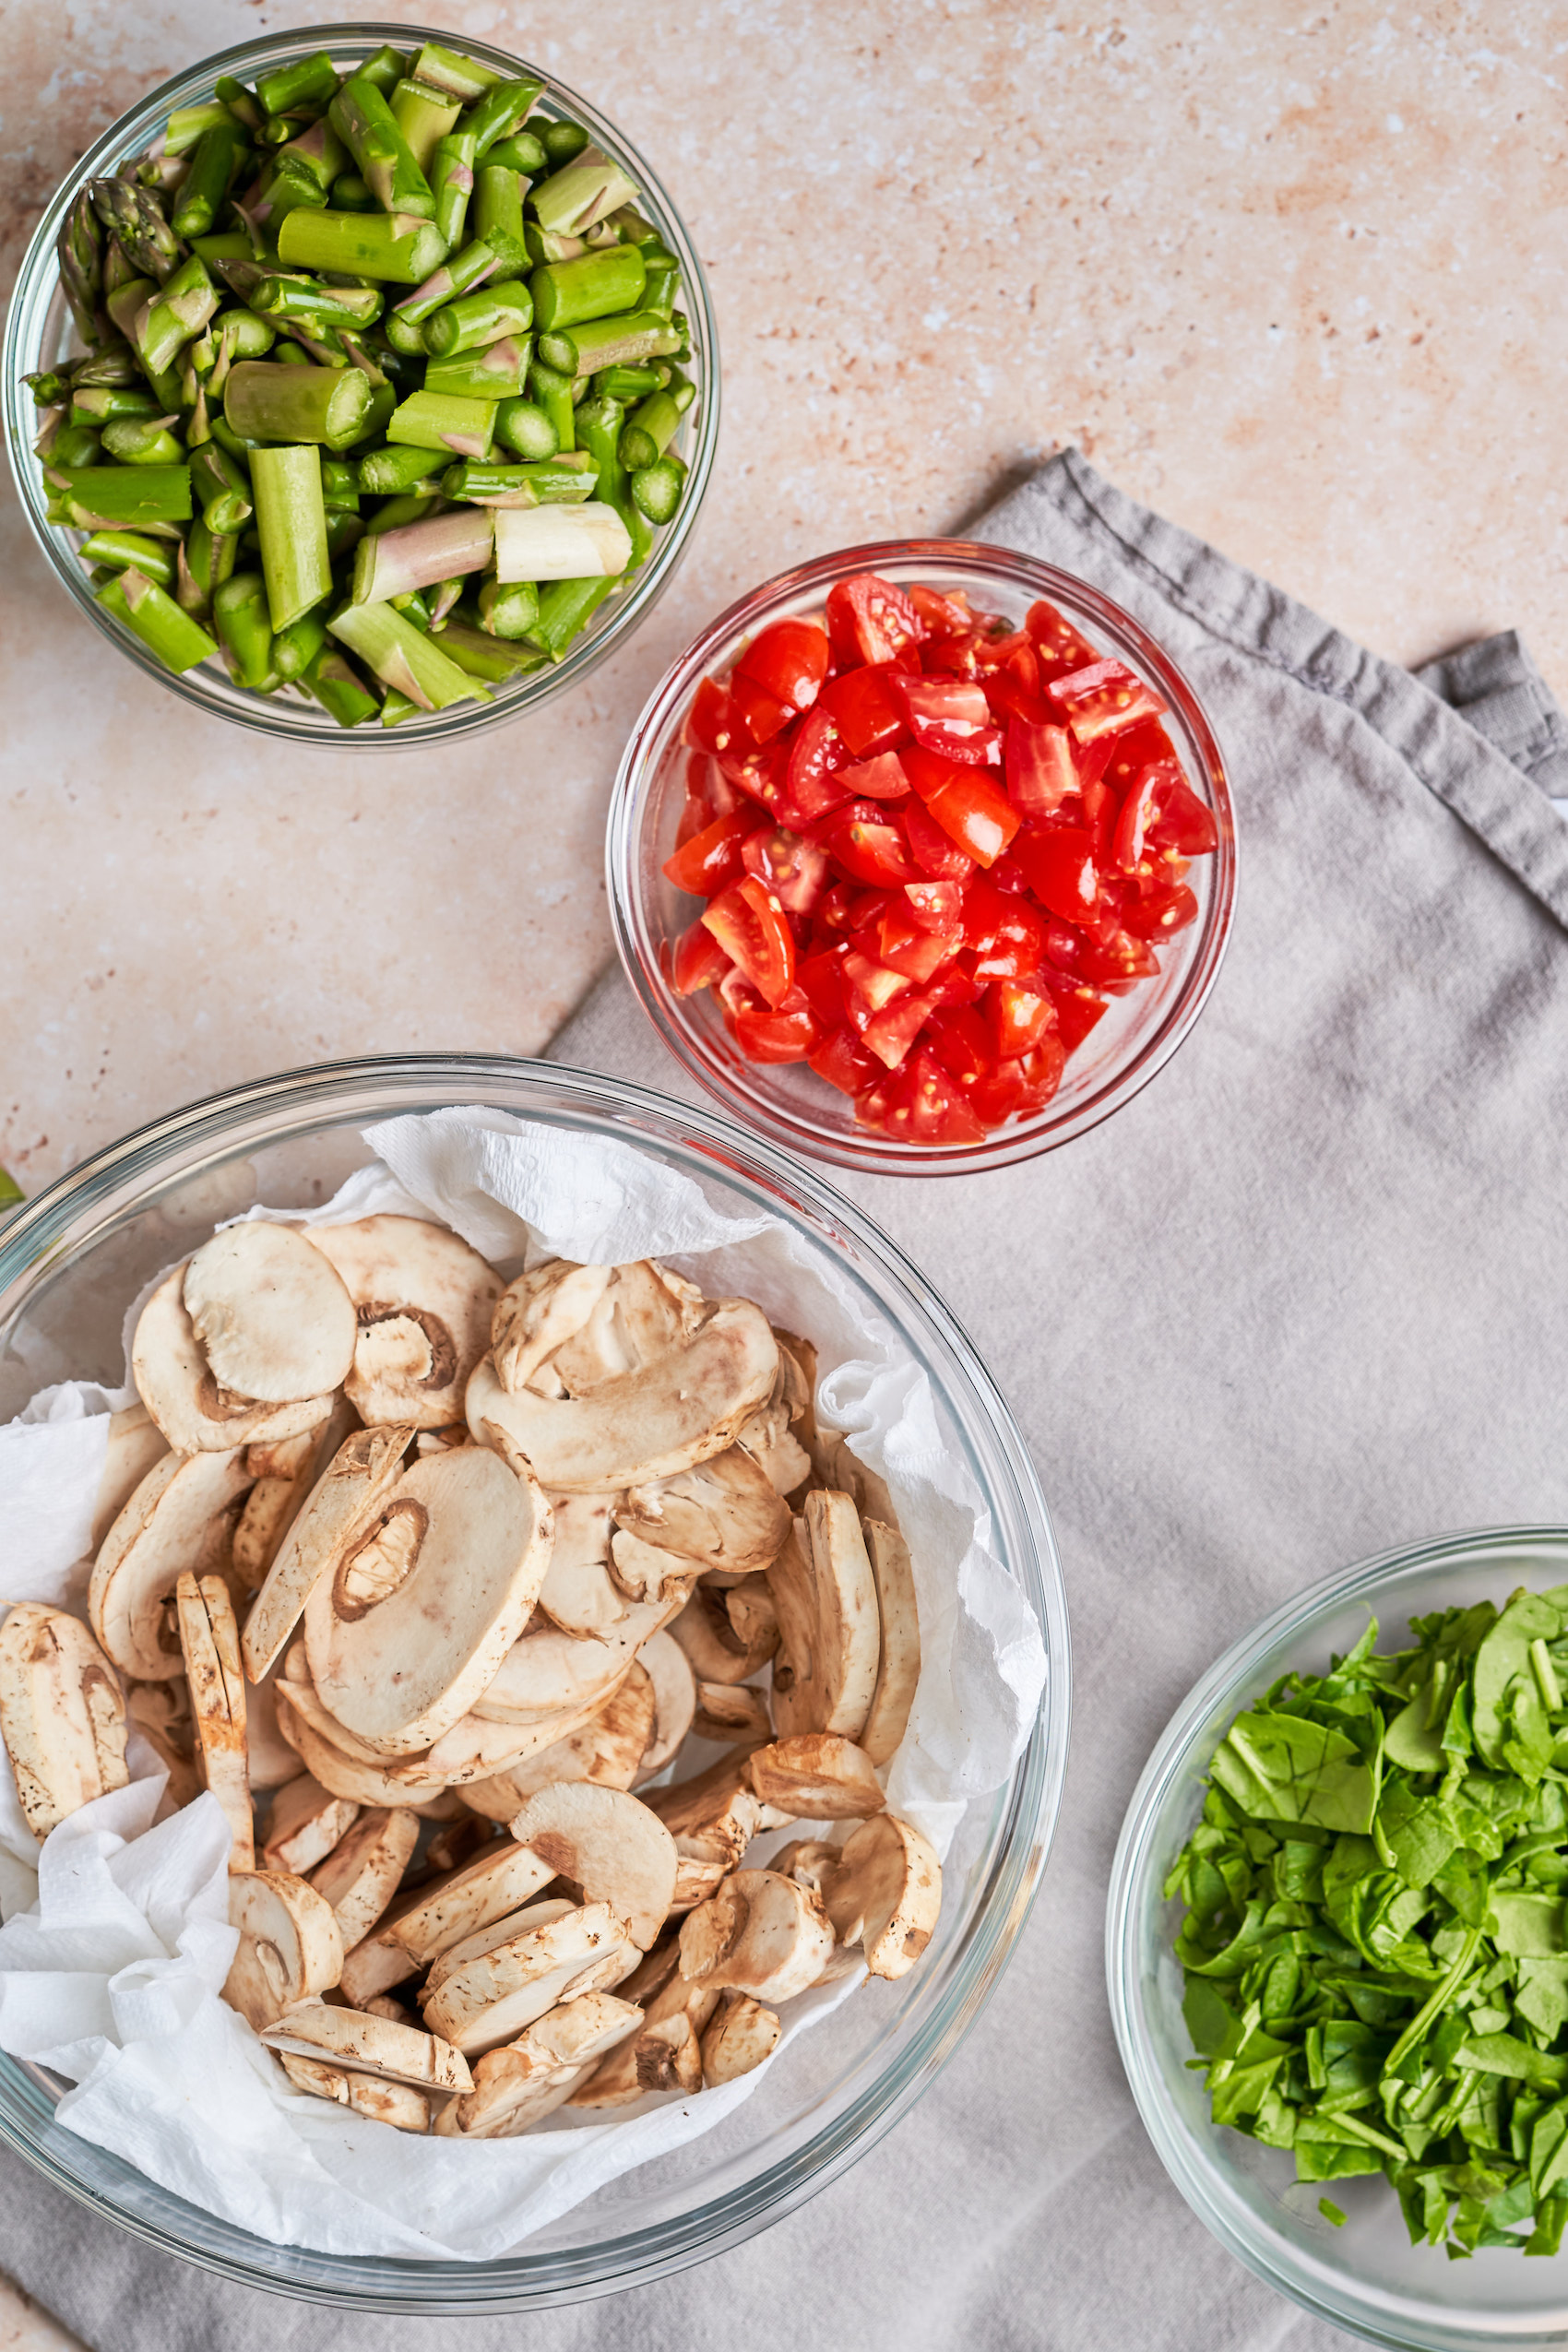 a collection of bowls holding raw vegetables including sliced mushrooms, asparagus, tomatoes and greens